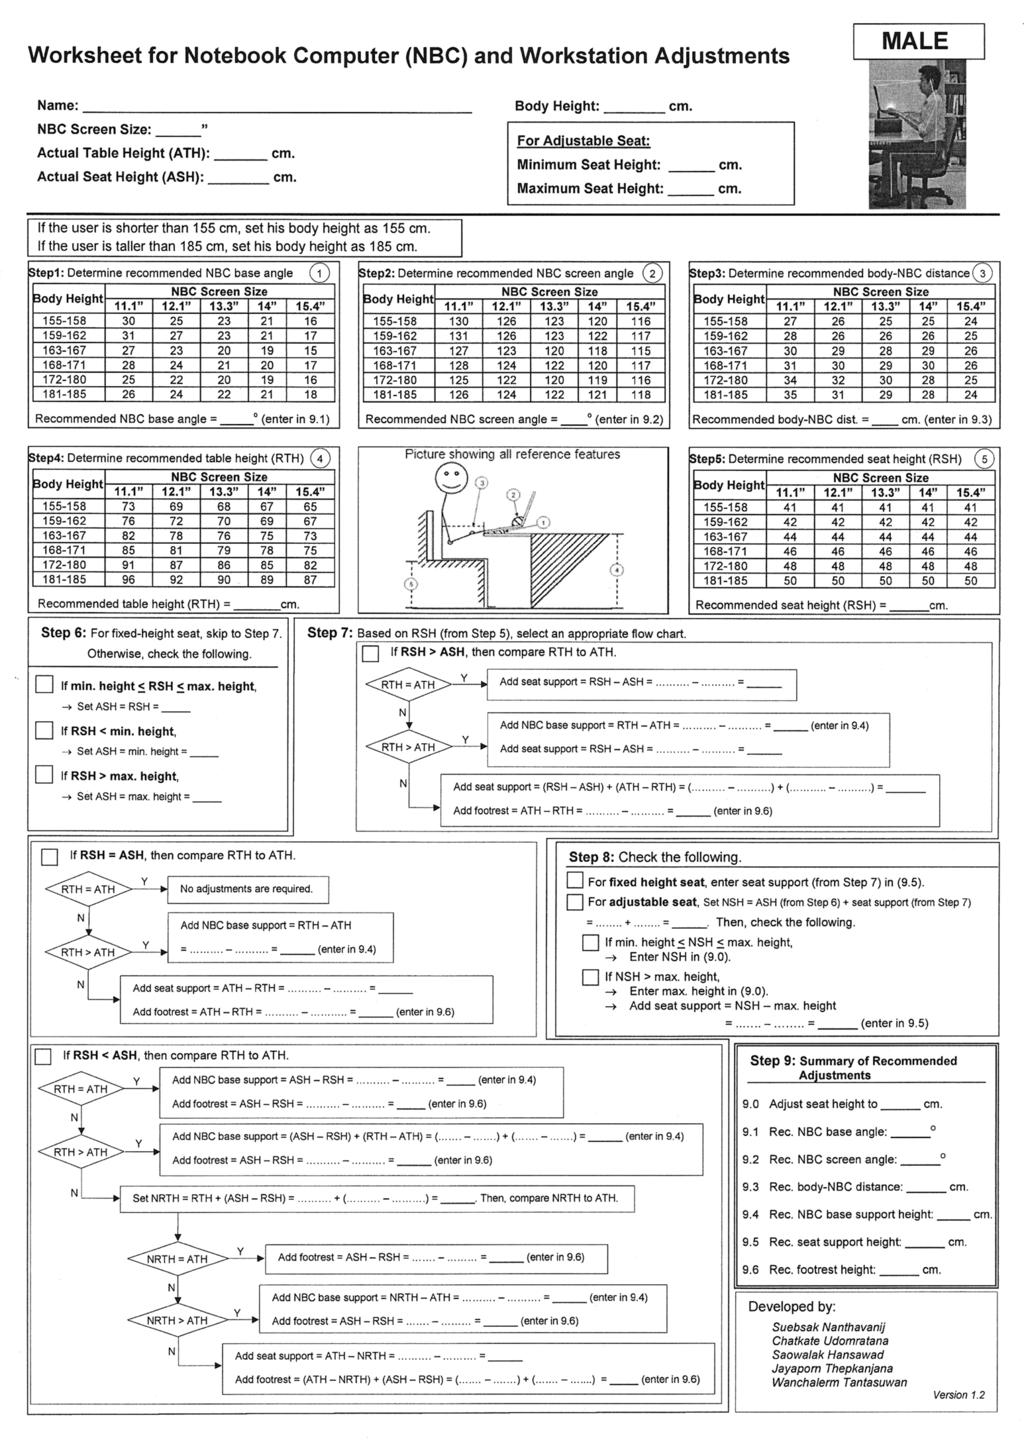 For detailed explanation on the computation procedure, see Nanthavanij et al. [19]. The adjustment worksheets for male and female NBC users are shown in Figs. 2 and 3, respectively.